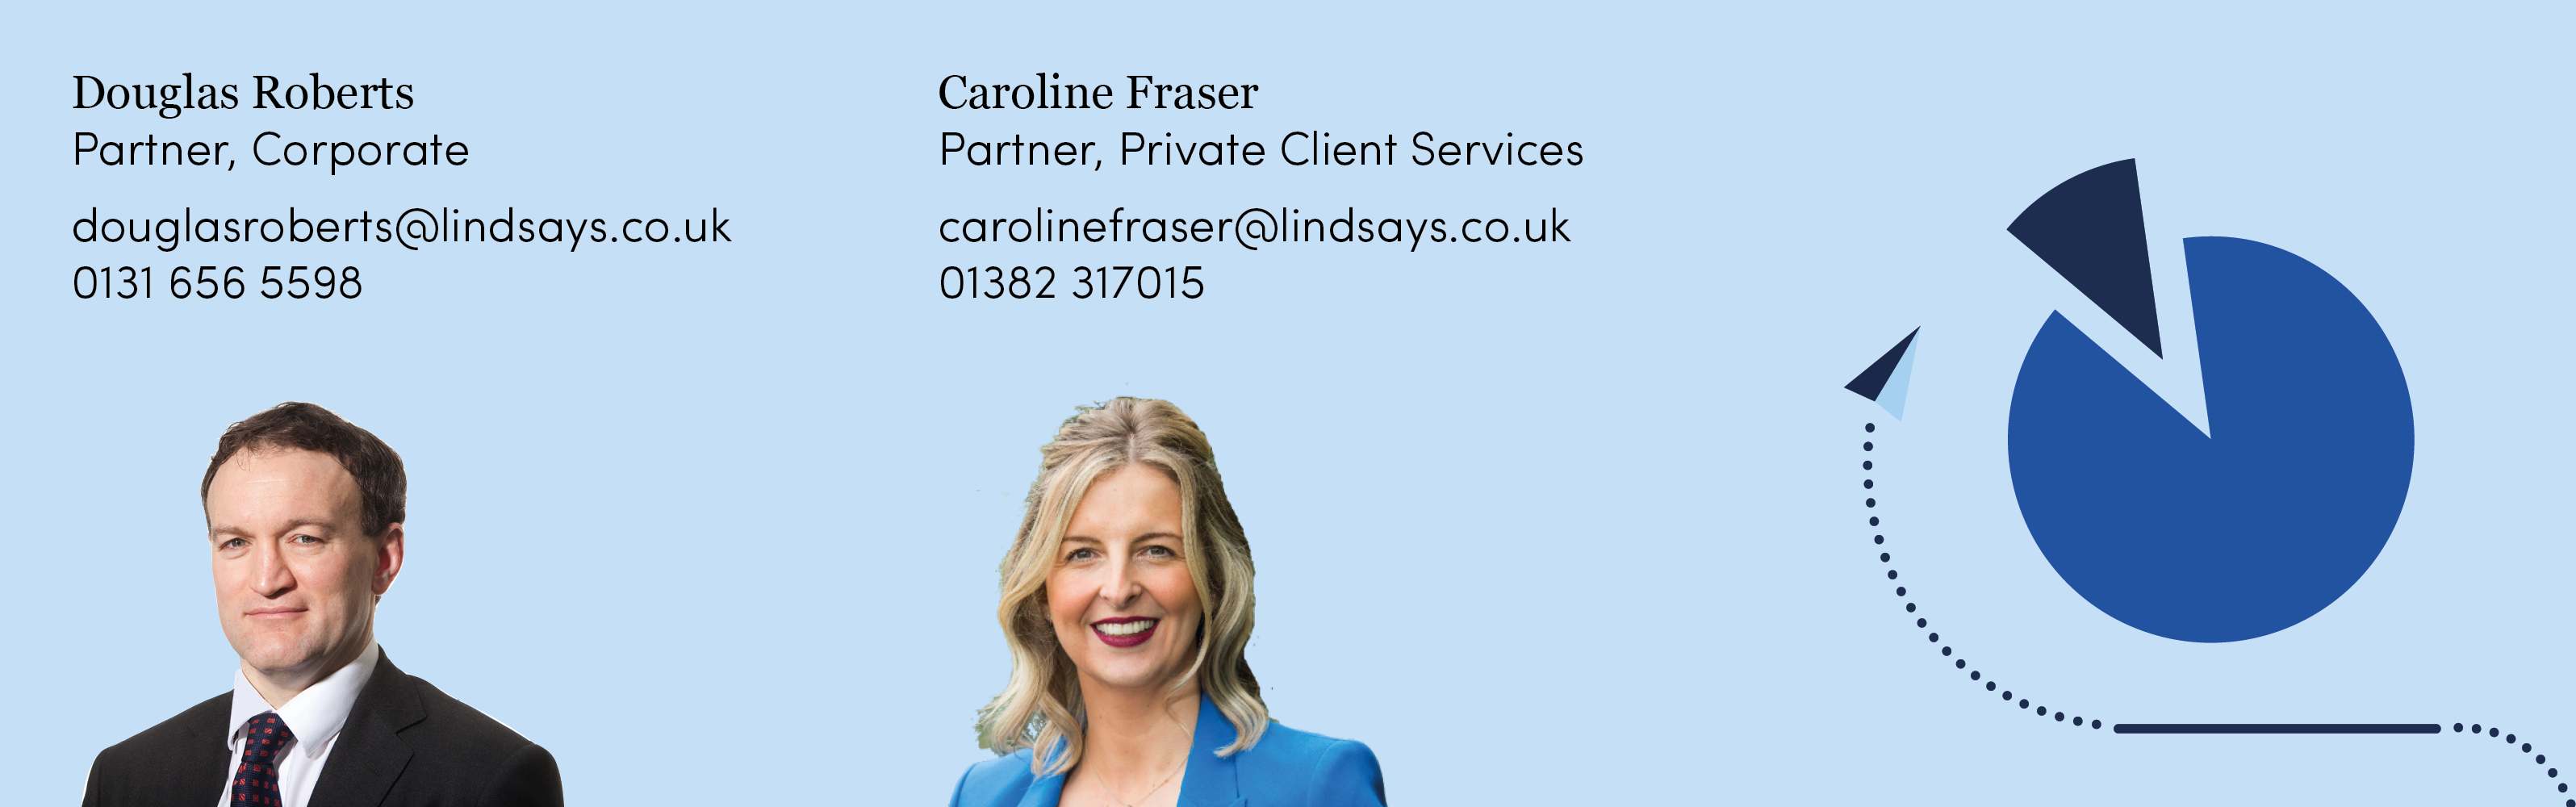 LL21-Corporate-and-Private-Client-Douglas-Roberts-and-Caroline-Fraser.png#asset:15094